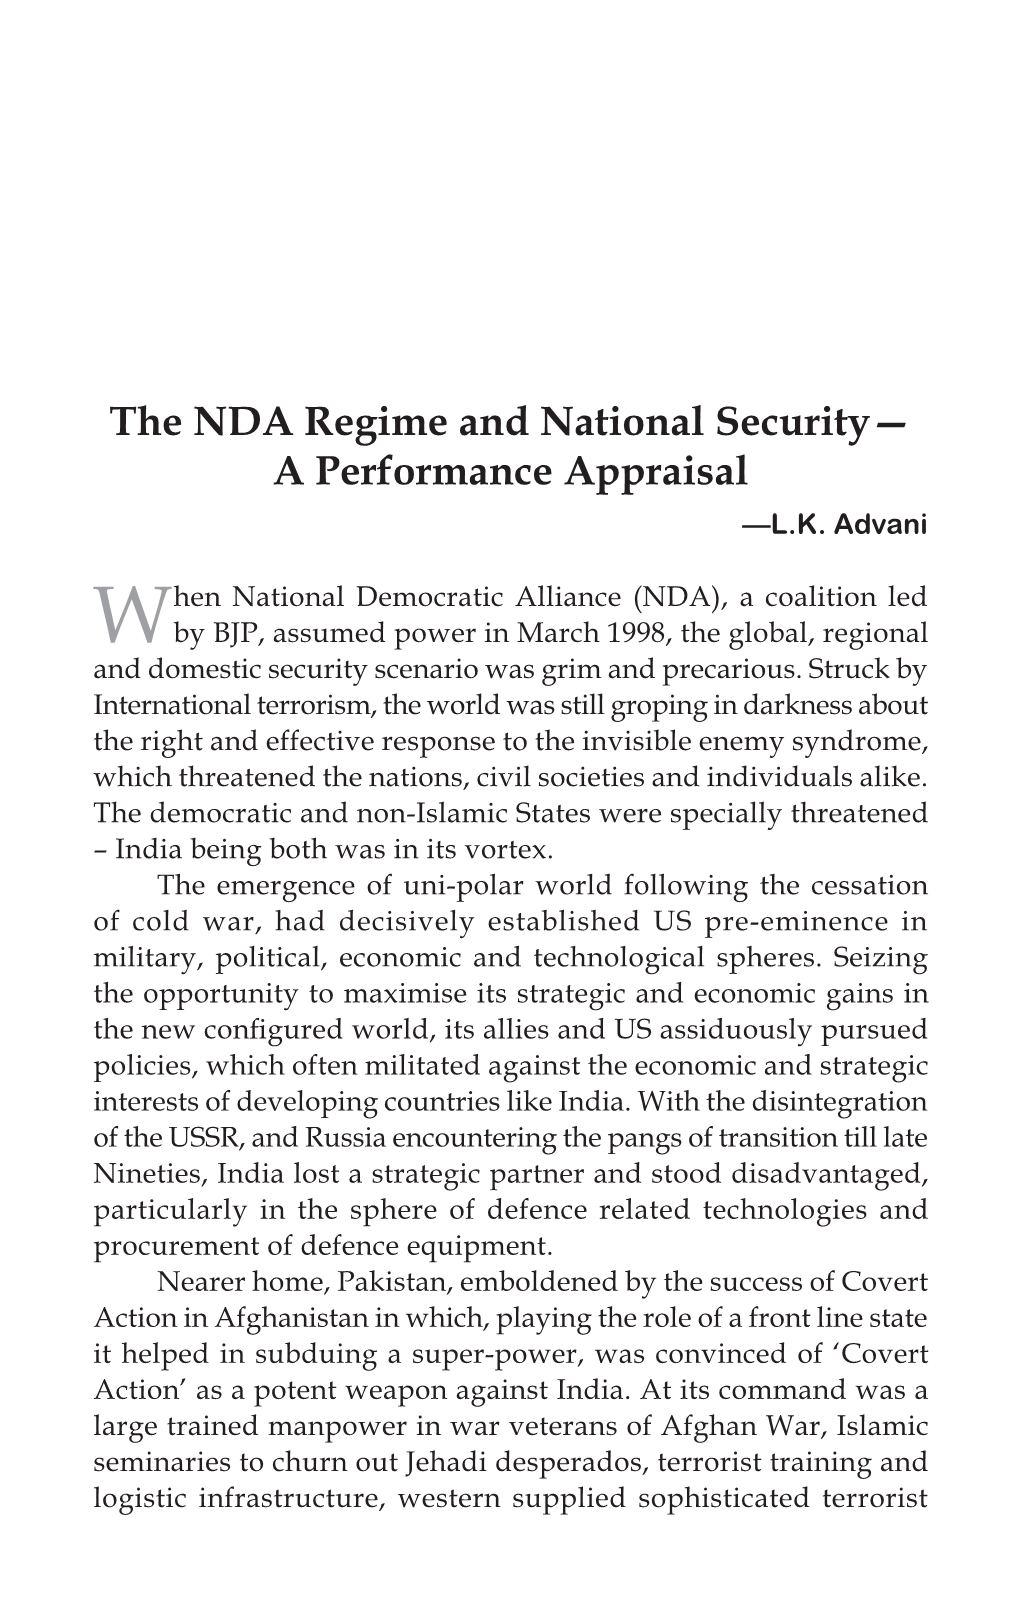 The NDA Regime and National Security— a Performance Appraisal —L.K